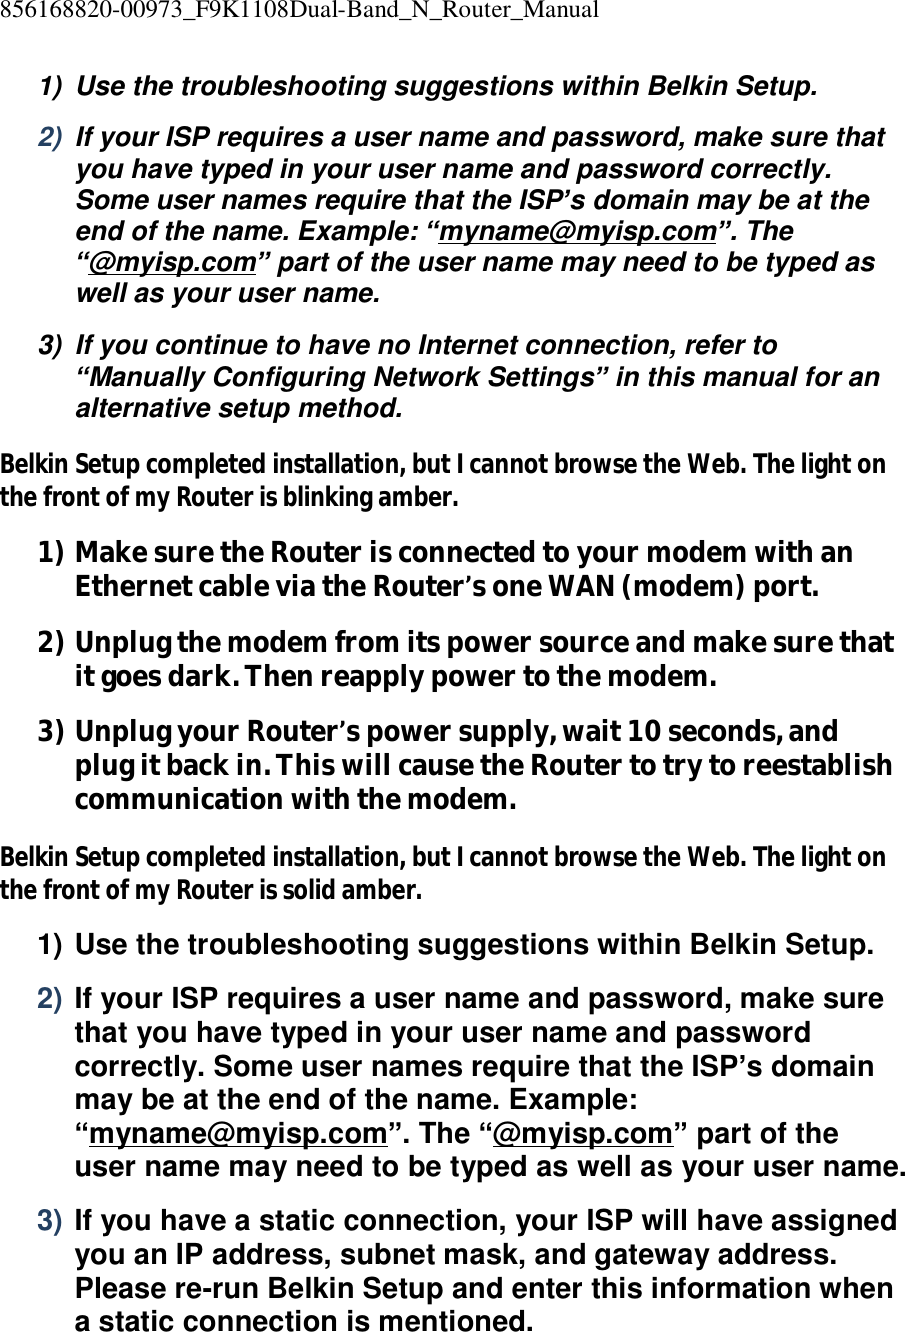 856168820-00973_F9K1108Dual-Band_N_Router_Manual  1) Use the troubleshooting suggestions within Belkin Setup. 2)  If your ISP requires a user name and password, make sure that you have typed in your user name and password correctly. Some user names require that the ISP’s domain may be at the end of the name. Example: “myname@myisp.com”. The “@myisp.com” part of the user name may need to be typed as well as your user name. 3) If you continue to have no Internet connection, refer to “Manually Configuring Network Settings” in this manual for an alternative setup method. Belkin Setup completed installation, but I cannot browse the Web. The light on the front of my Router is blinking amber. 1) Make sure the Router is connected to your modem with an Ethernet cable via the Router’s one WAN (modem) port. 2) Unplug the modem from its power source and make sure that it goes dark. Then reapply power to the modem. 3) Unplug your Router’s power supply, wait 10 seconds, and plug it back in. This will cause the Router to try to reestablish communication with the modem. Belkin Setup completed installation, but I cannot browse the Web. The light on the front of my Router is solid amber. 1) Use the troubleshooting suggestions within Belkin Setup. 2) If your ISP requires a user name and password, make sure that you have typed in your user name and password correctly. Some user names require that the ISP’s domain may be at the end of the name. Example: “myname@myisp.com”. The “@myisp.com” part of the user name may need to be typed as well as your user name. 3) If you have a static connection, your ISP will have assigned you an IP address, subnet mask, and gateway address. Please re-run Belkin Setup and enter this information when a static connection is mentioned. 